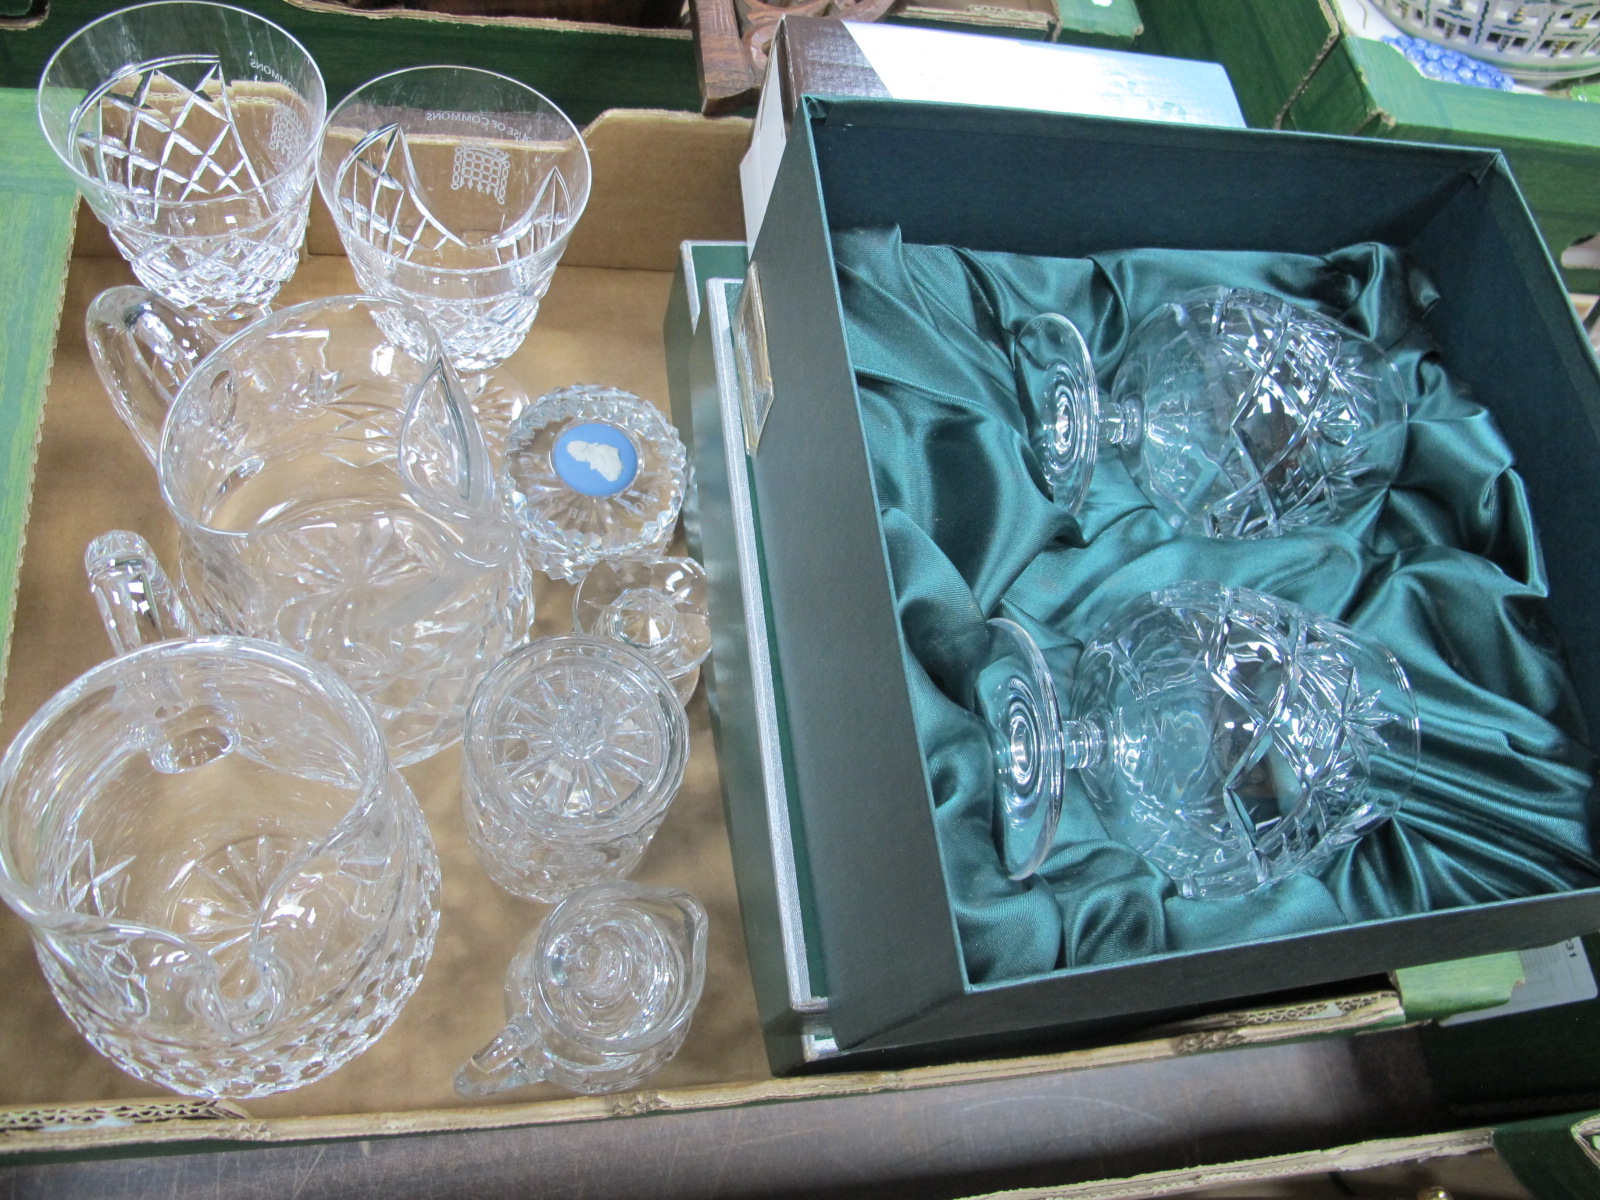 Three House of Commons Large Goblets by Stuart, water jugs, Wedgwood Nelson paperweight, other